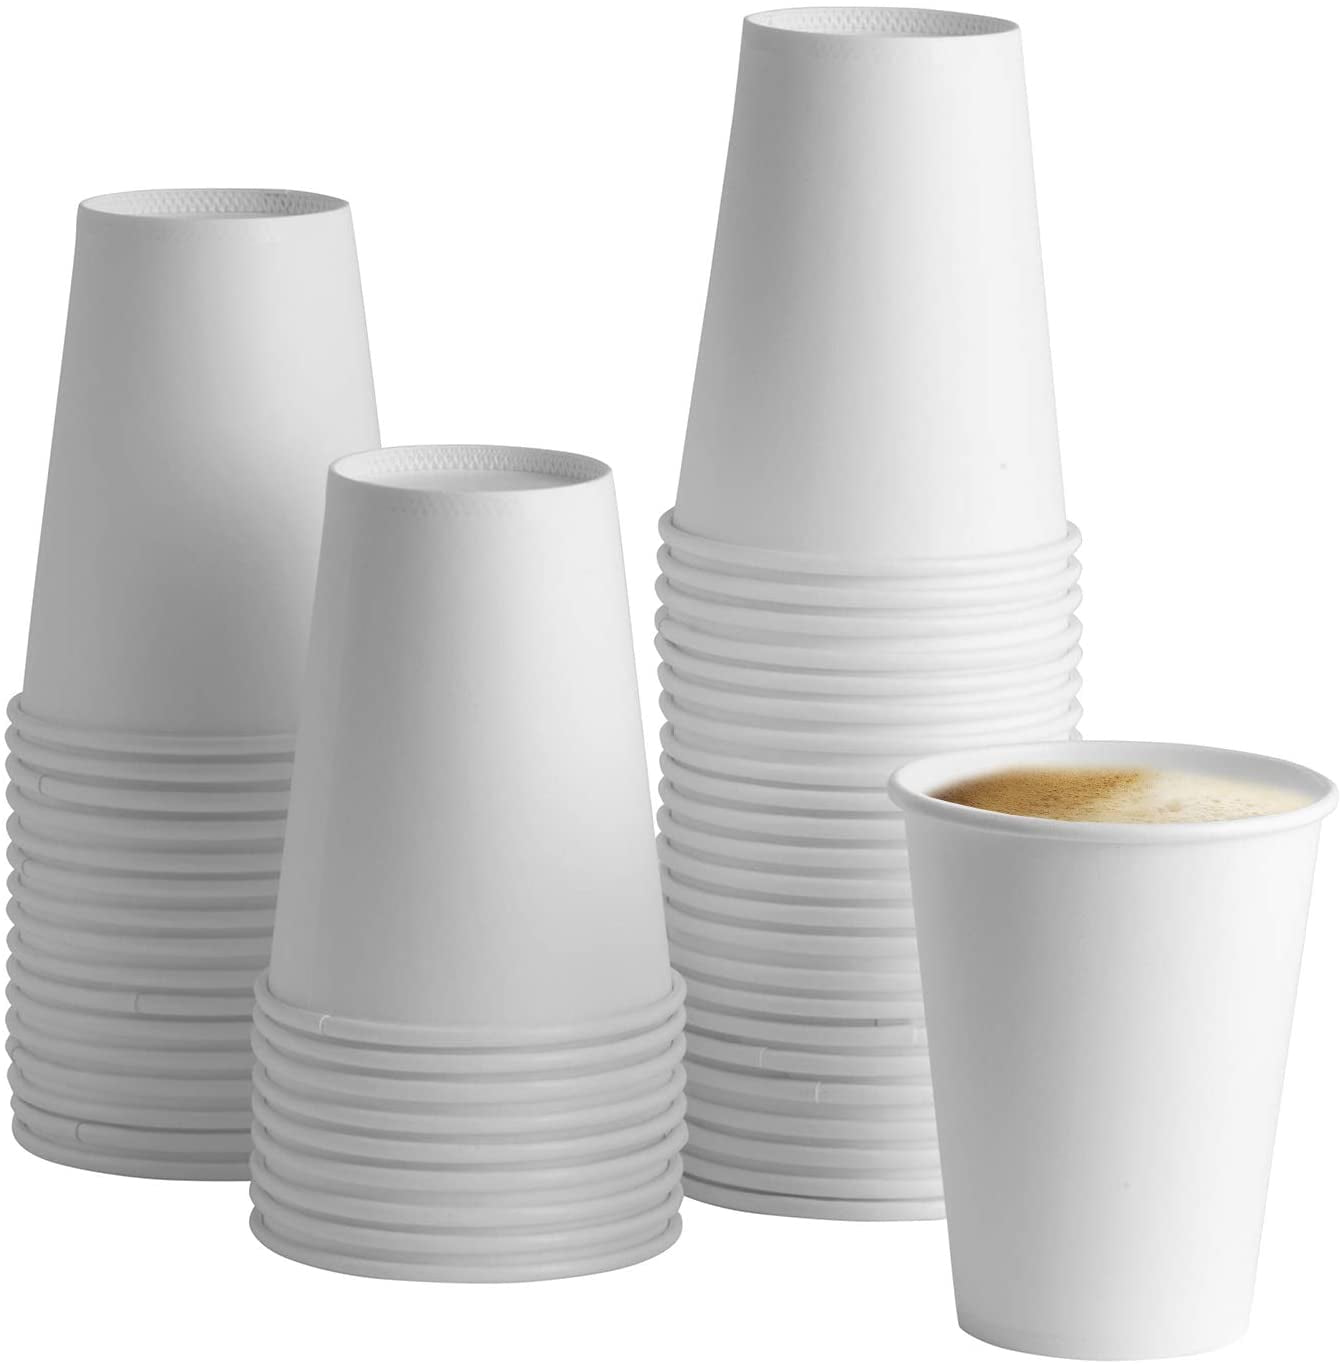 100 x Paper Cups White Kraft Cups Double Wall Paper Cups For Hot Drinks And Lids 